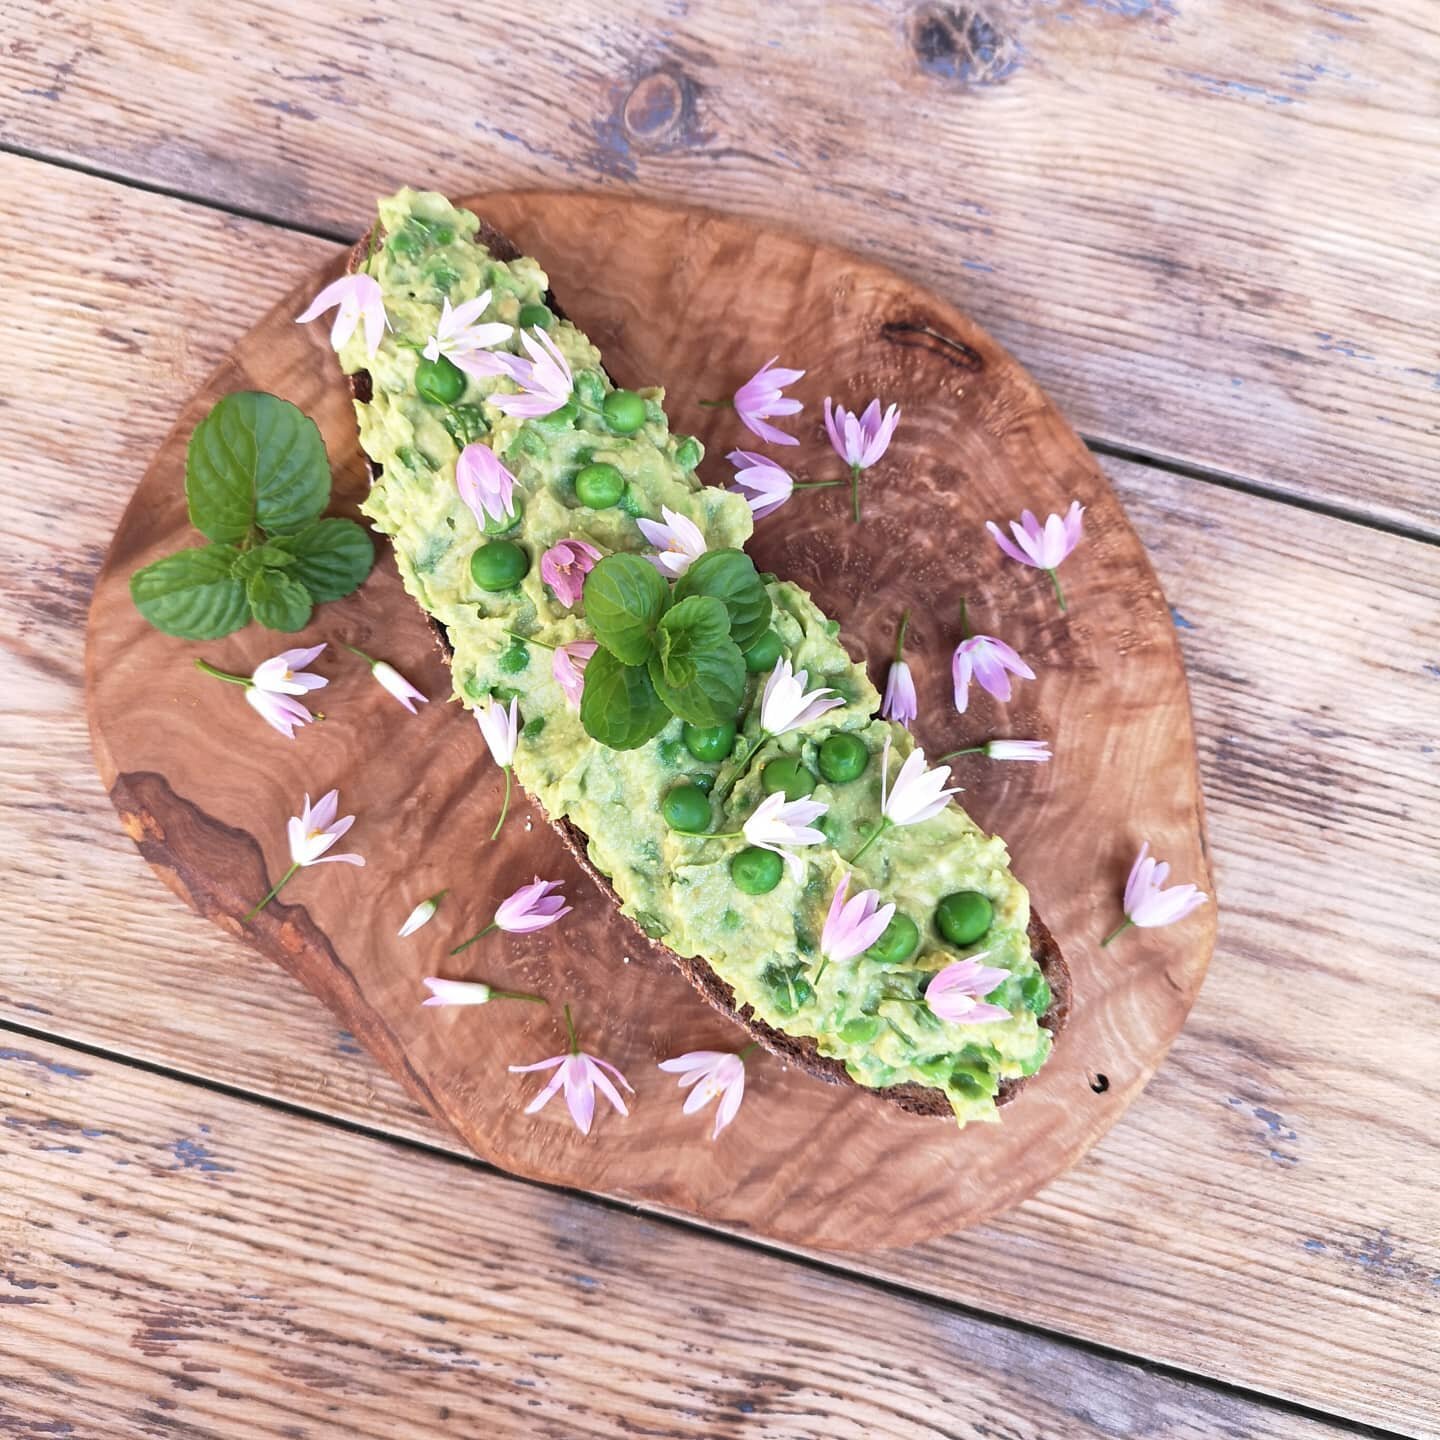 New recipe on the website for this Avocado and Pea Smash with Lemon Mint and Wild Garlic Flowers 🌸 

I'm so happy to see all the wild garlic back out in the fields around our house...it's one of my favourite things to use in summer salads and stir f